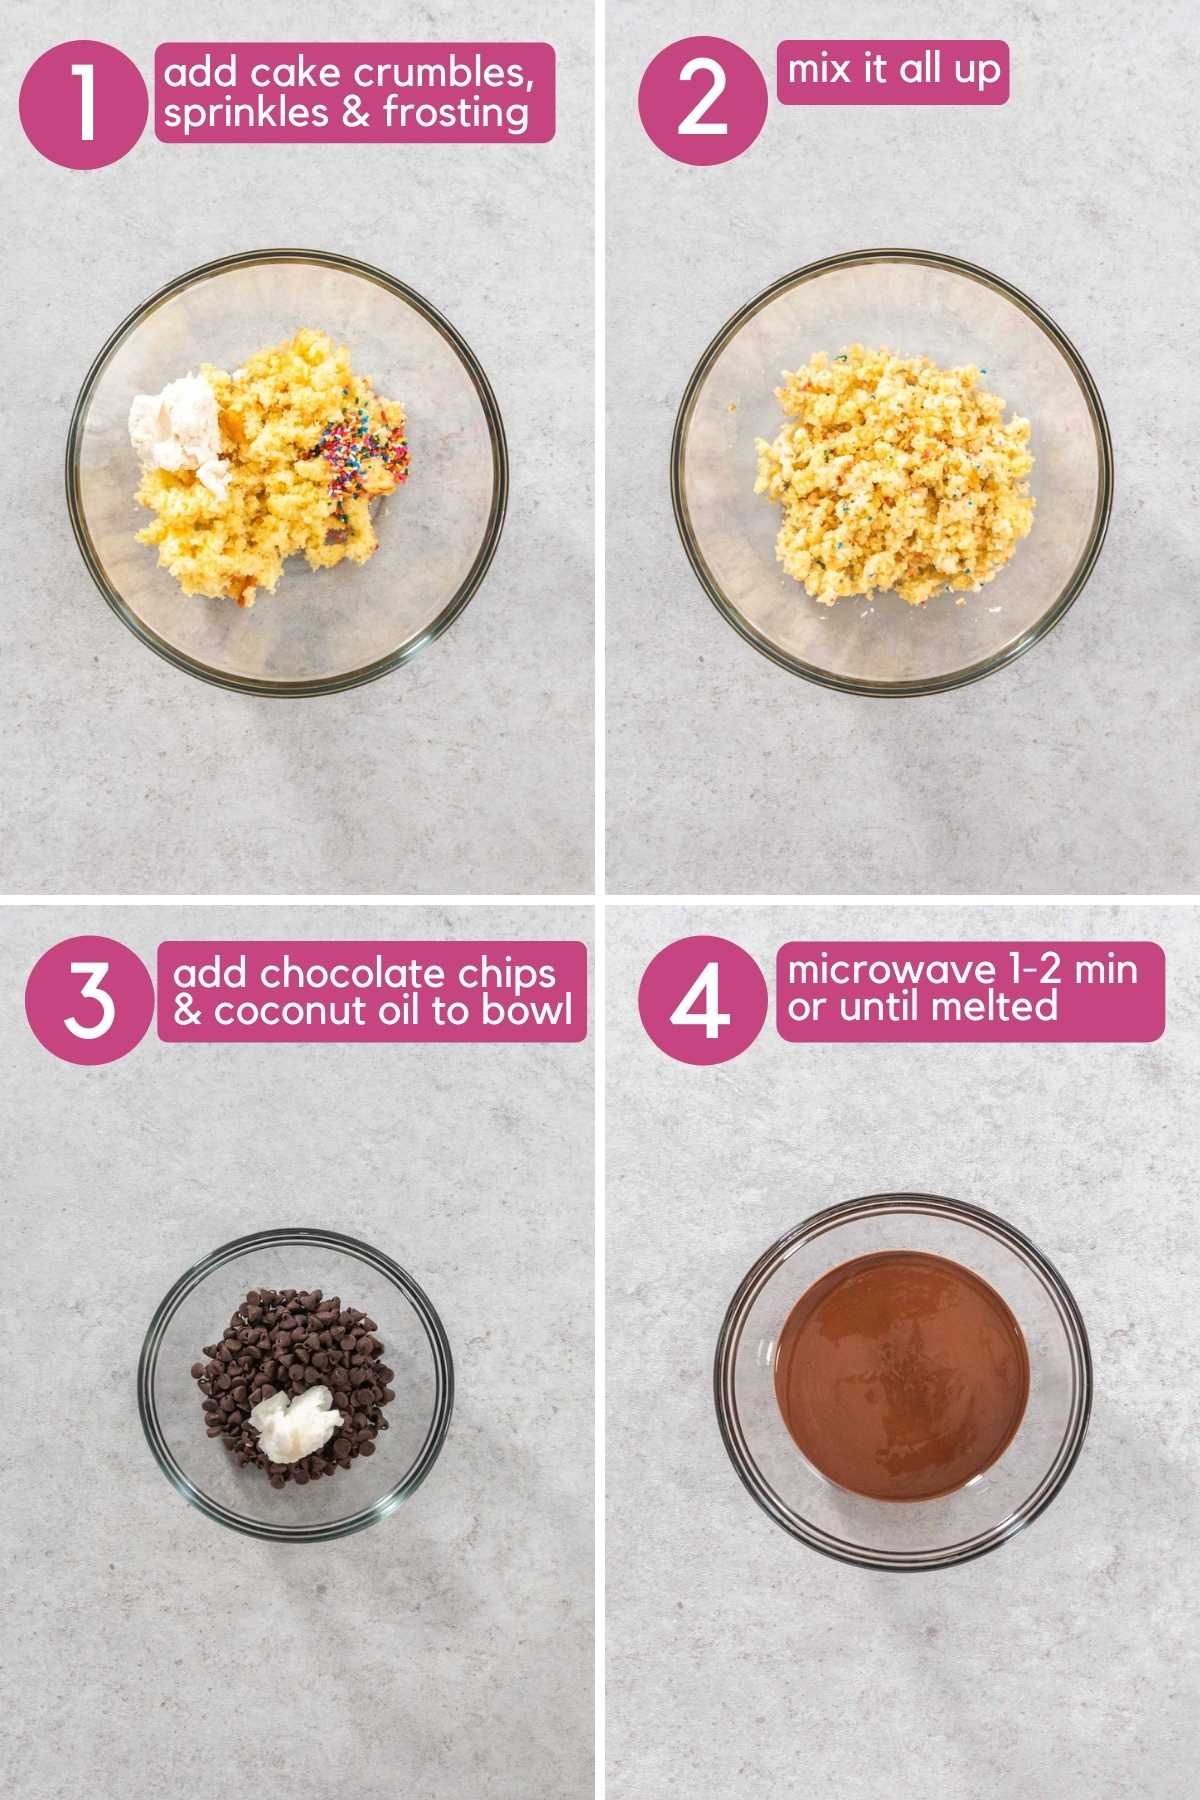 Add cake crumbles, sprinkles and frosting then melt chocolate chips and coconut oil.